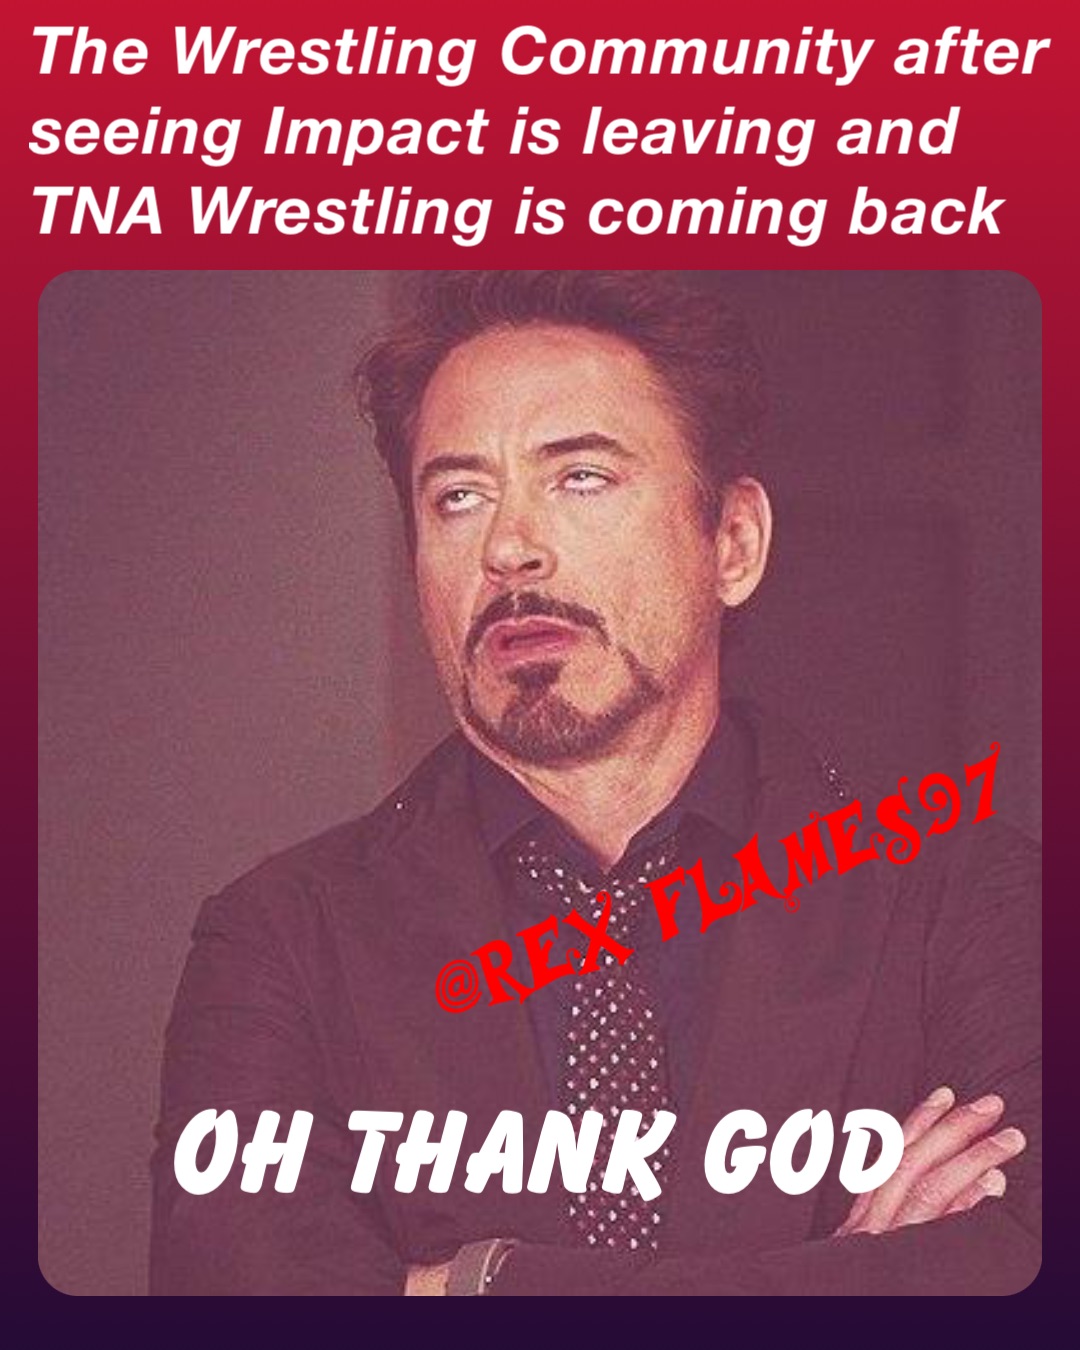 The Wrestling Community after seeing Impact is leaving and TNA Wrestling is coming back OH THANK GOD